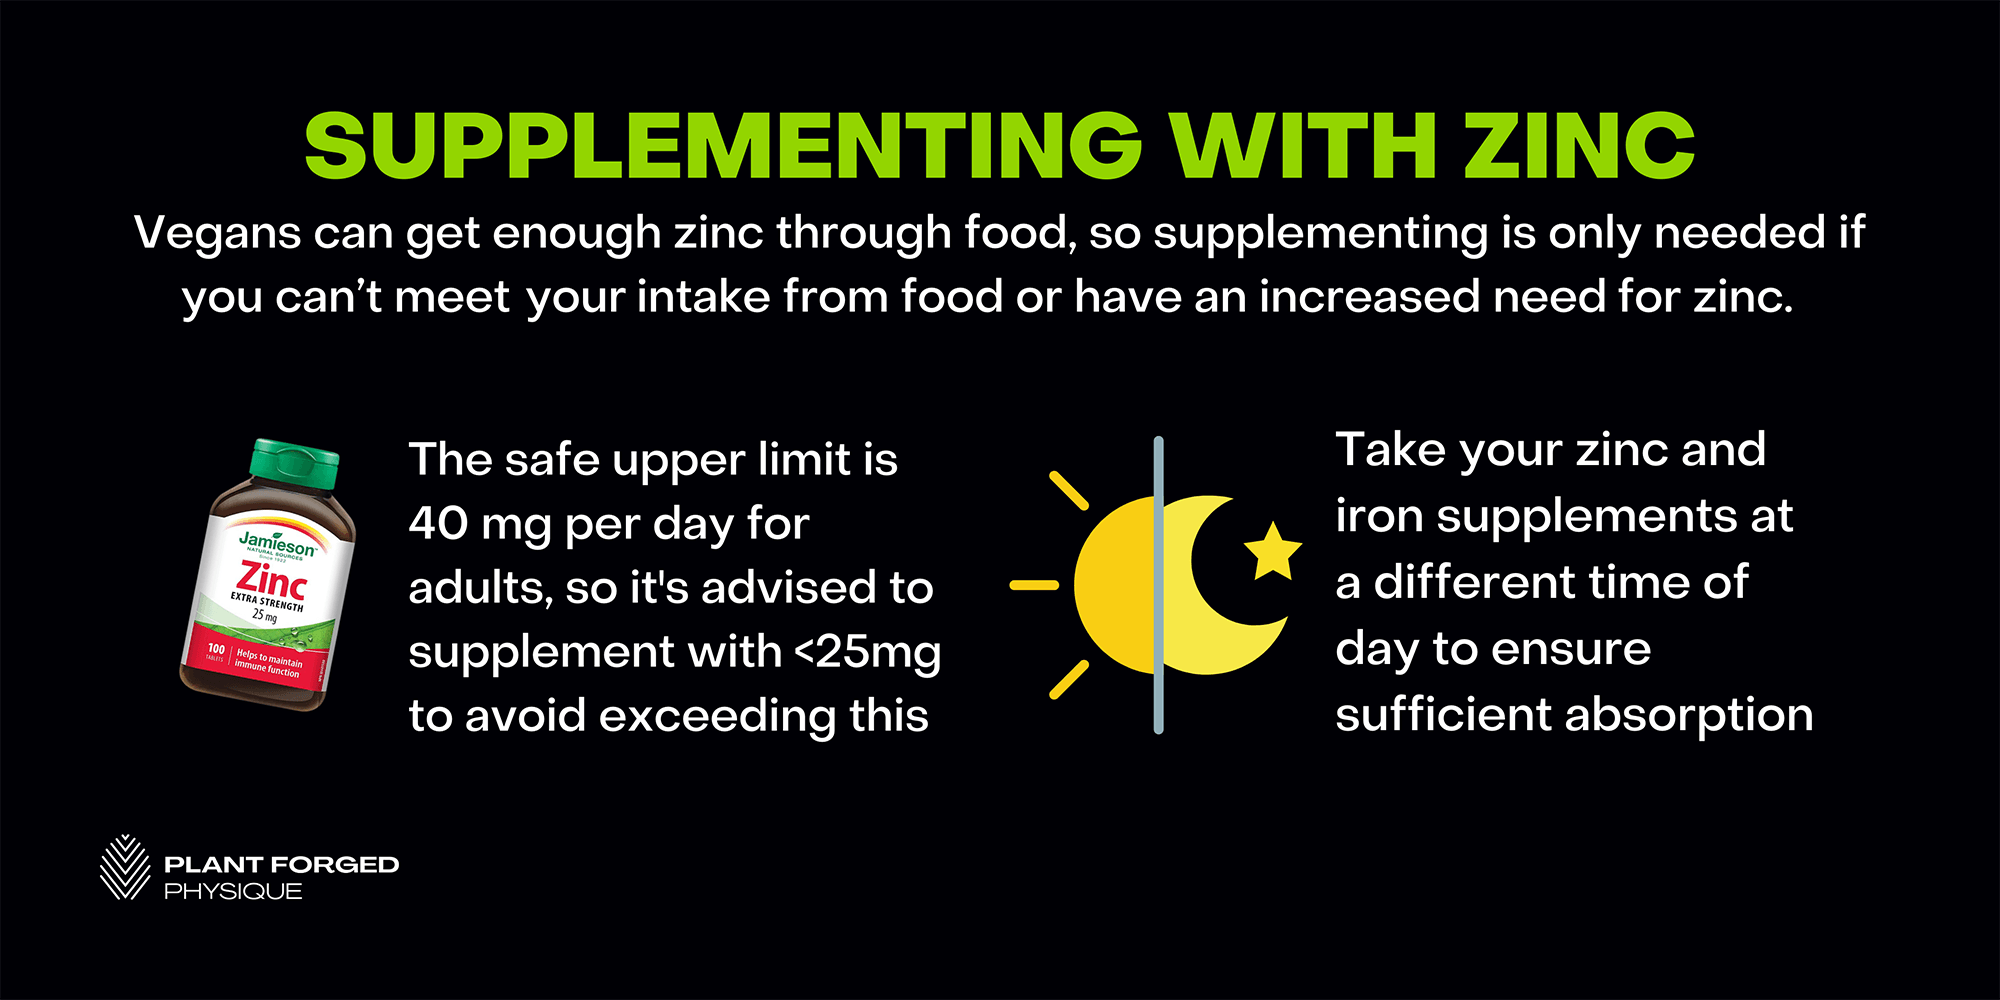 Supplementing with zinc